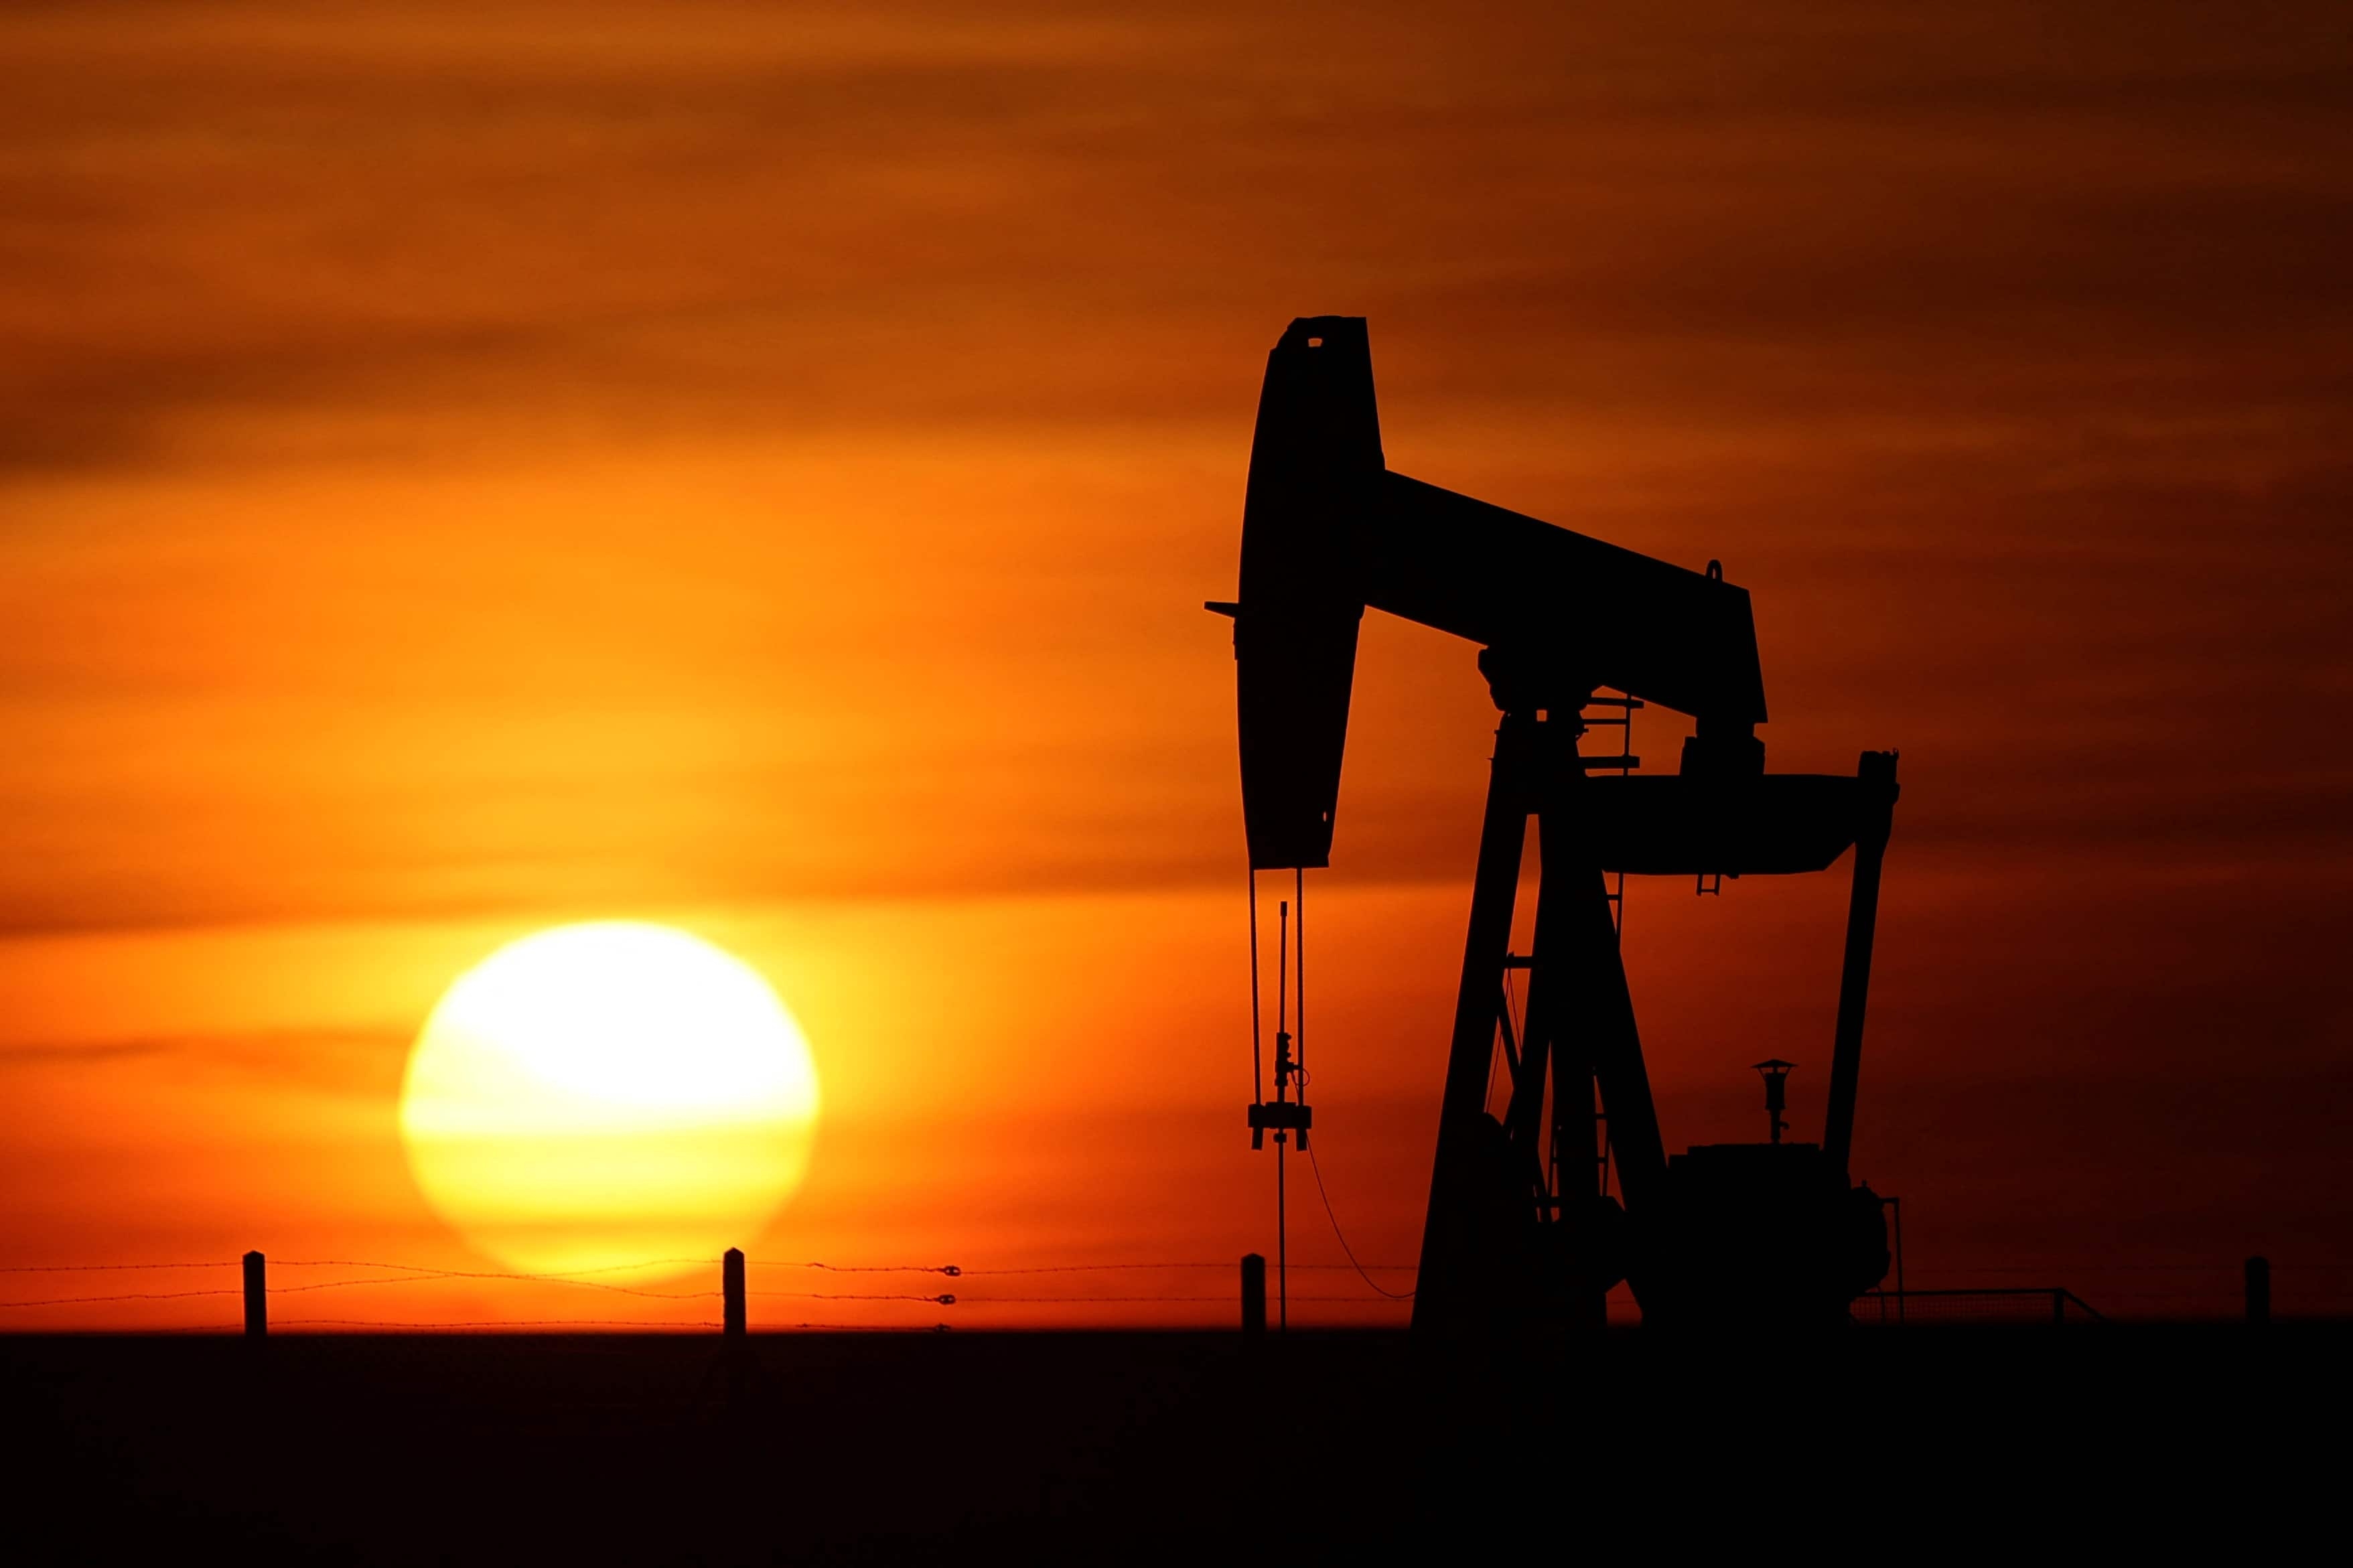 Oil prices fell about a $1 on Friday as the United States and allies considered releasing more oil from storage to cool markets and as traders faced higher costs for trading benchmark Brent futures. Brent crude futures fell $1.07, or 0.9 percent, to $117.96 a barrel at 0053 GMT, after sliding 2.1 percent in the previous session. US West Texas Intermediate (WTI) crude futures fell $1.20, or 1.1 percent, to $111.14 a barrel, having dropped 2.3 percent in the previous session.